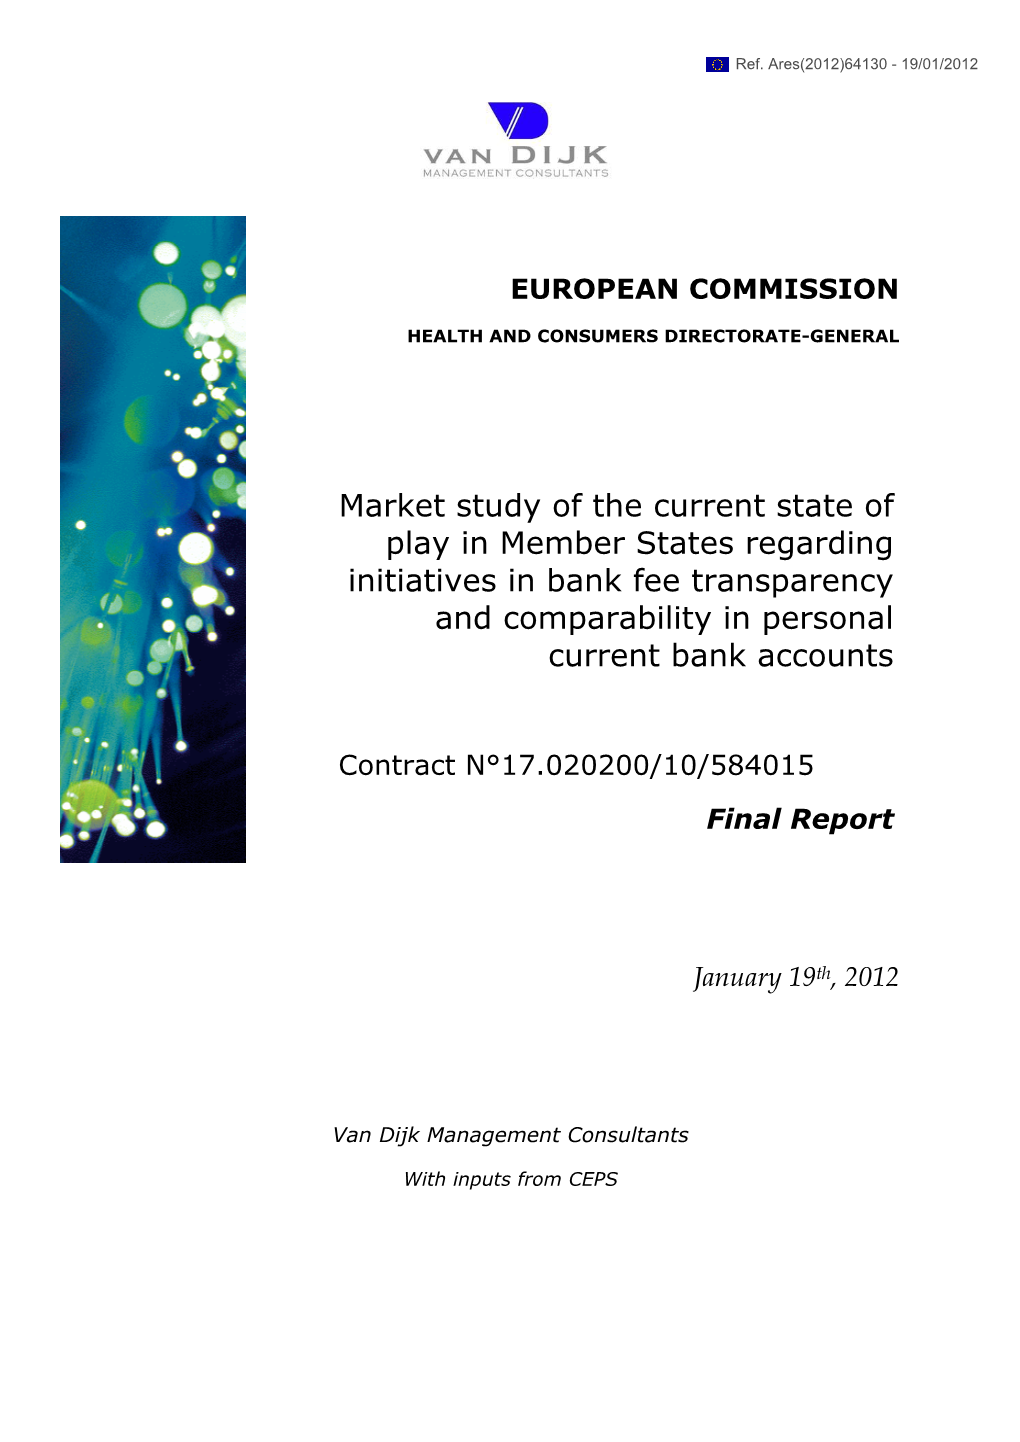 Market Study of the Current State of Play in Member States Regarding Initiatives in Bank Fee Transparency and Comparability in Personal Current Bank Accounts